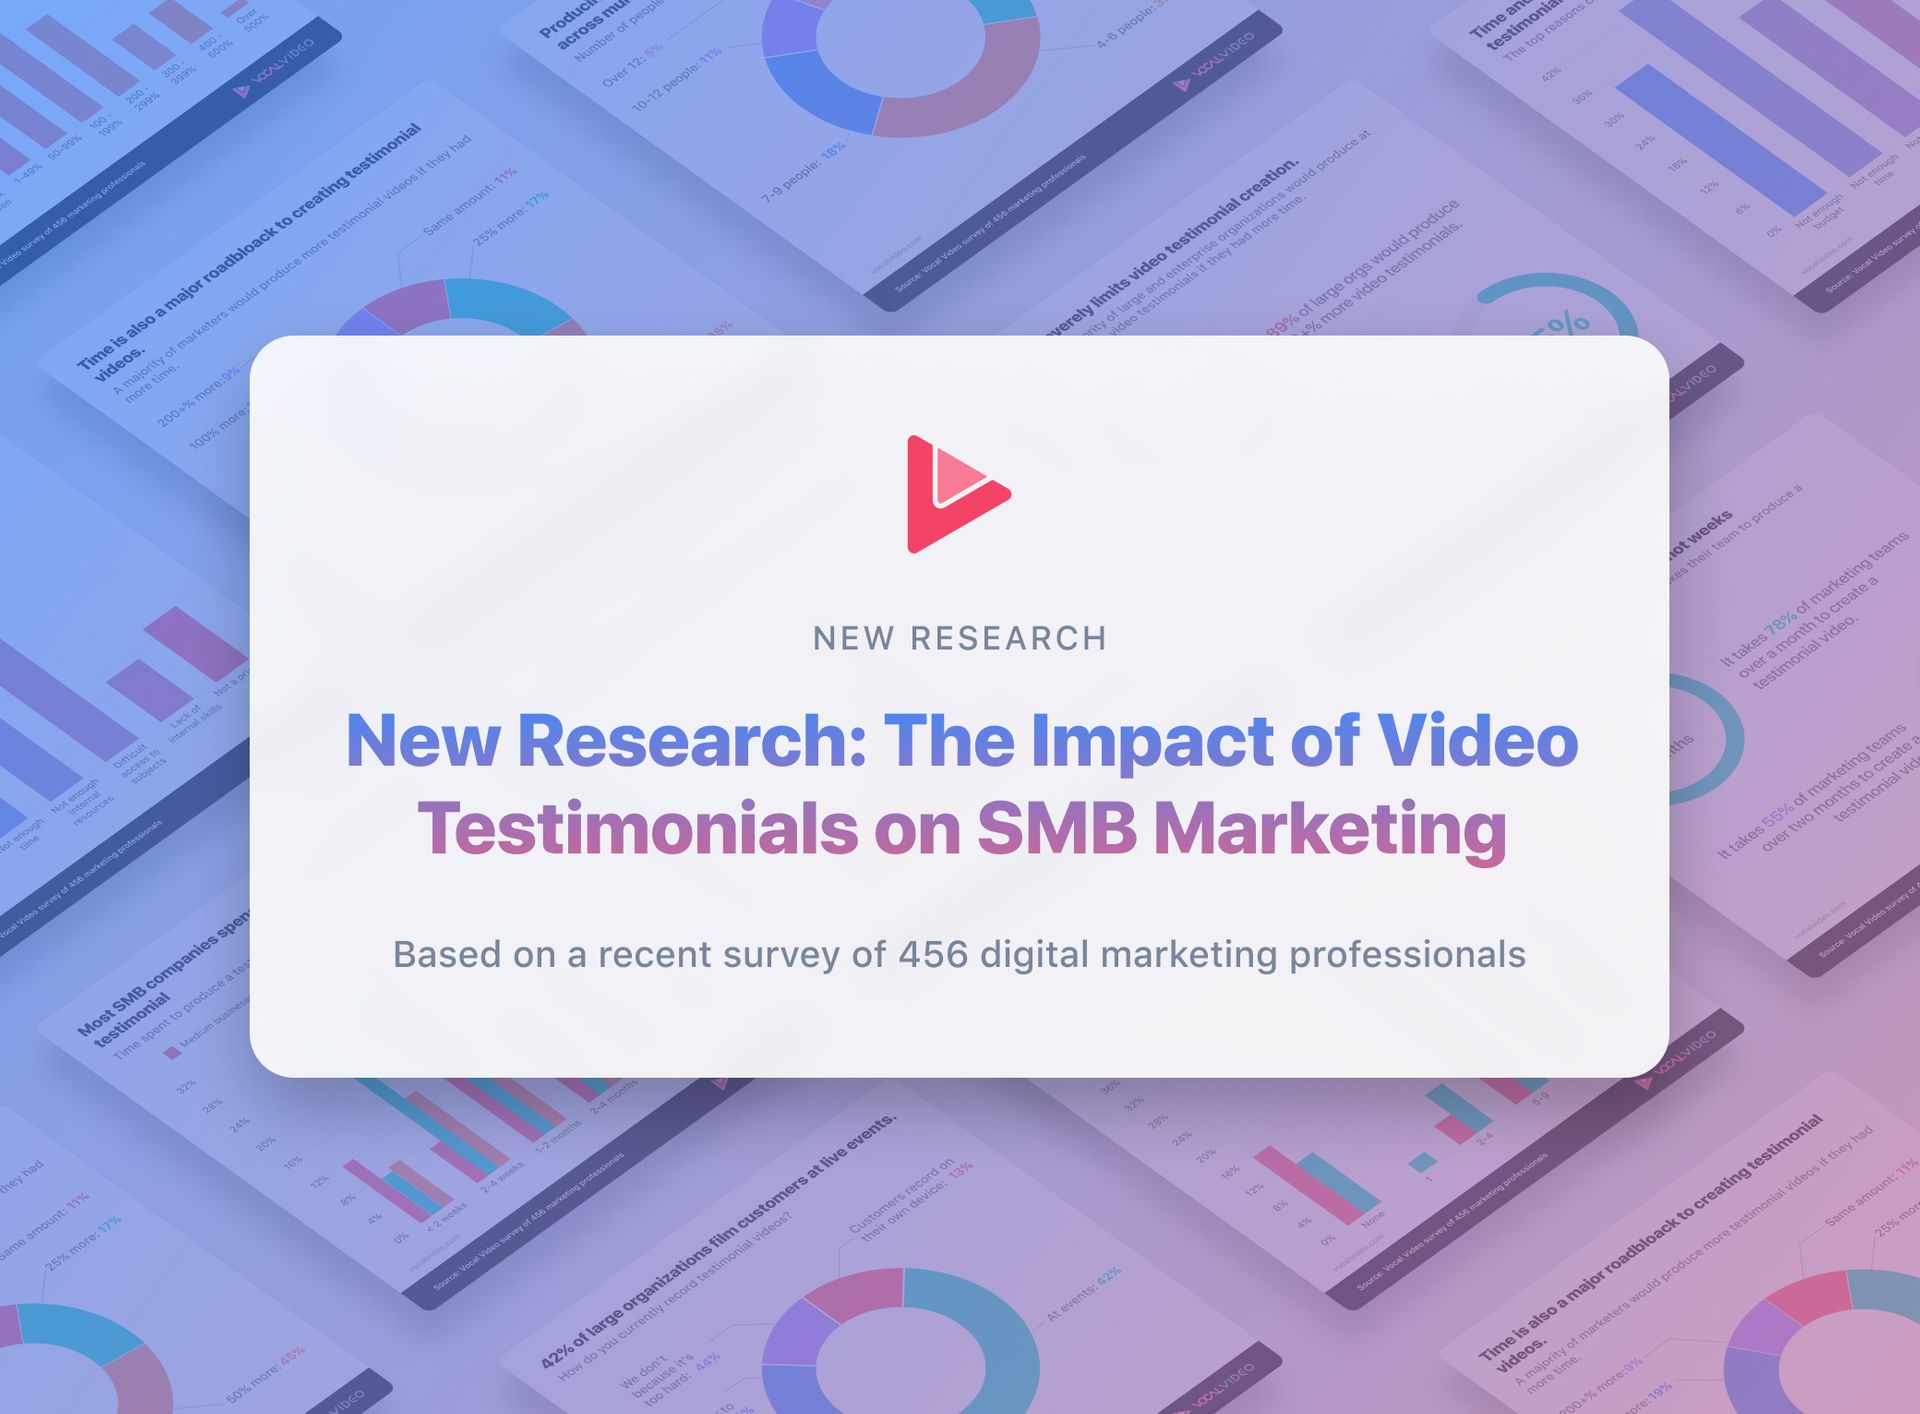 New Research: The Impact of Video Testimonials on SMB Marketing